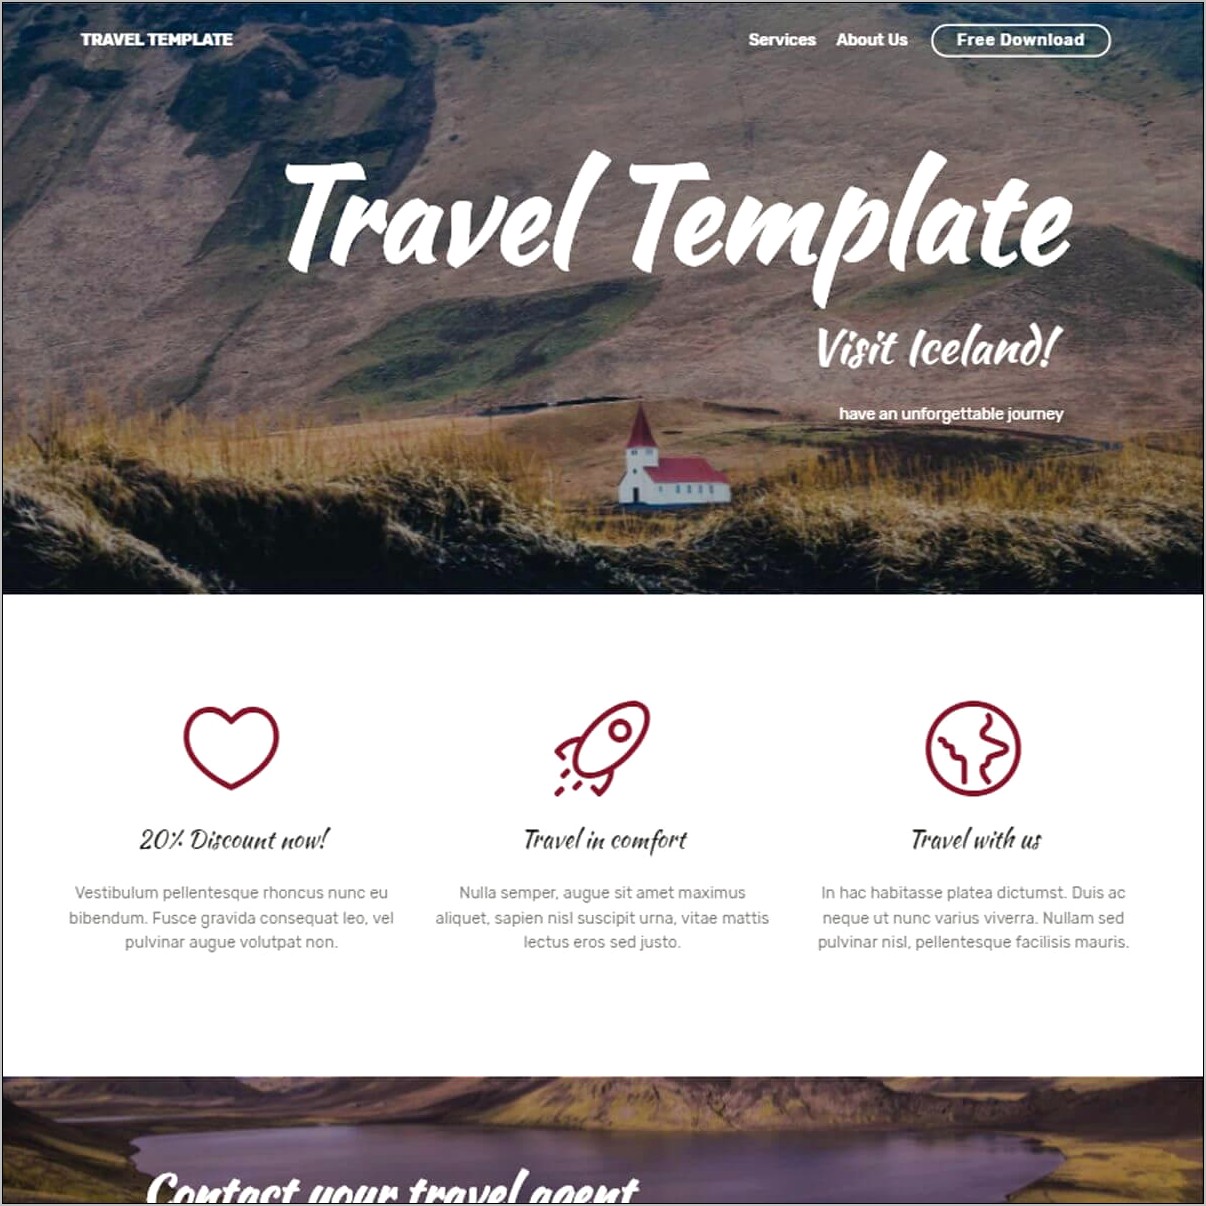 About Us Webpage Template Free Download